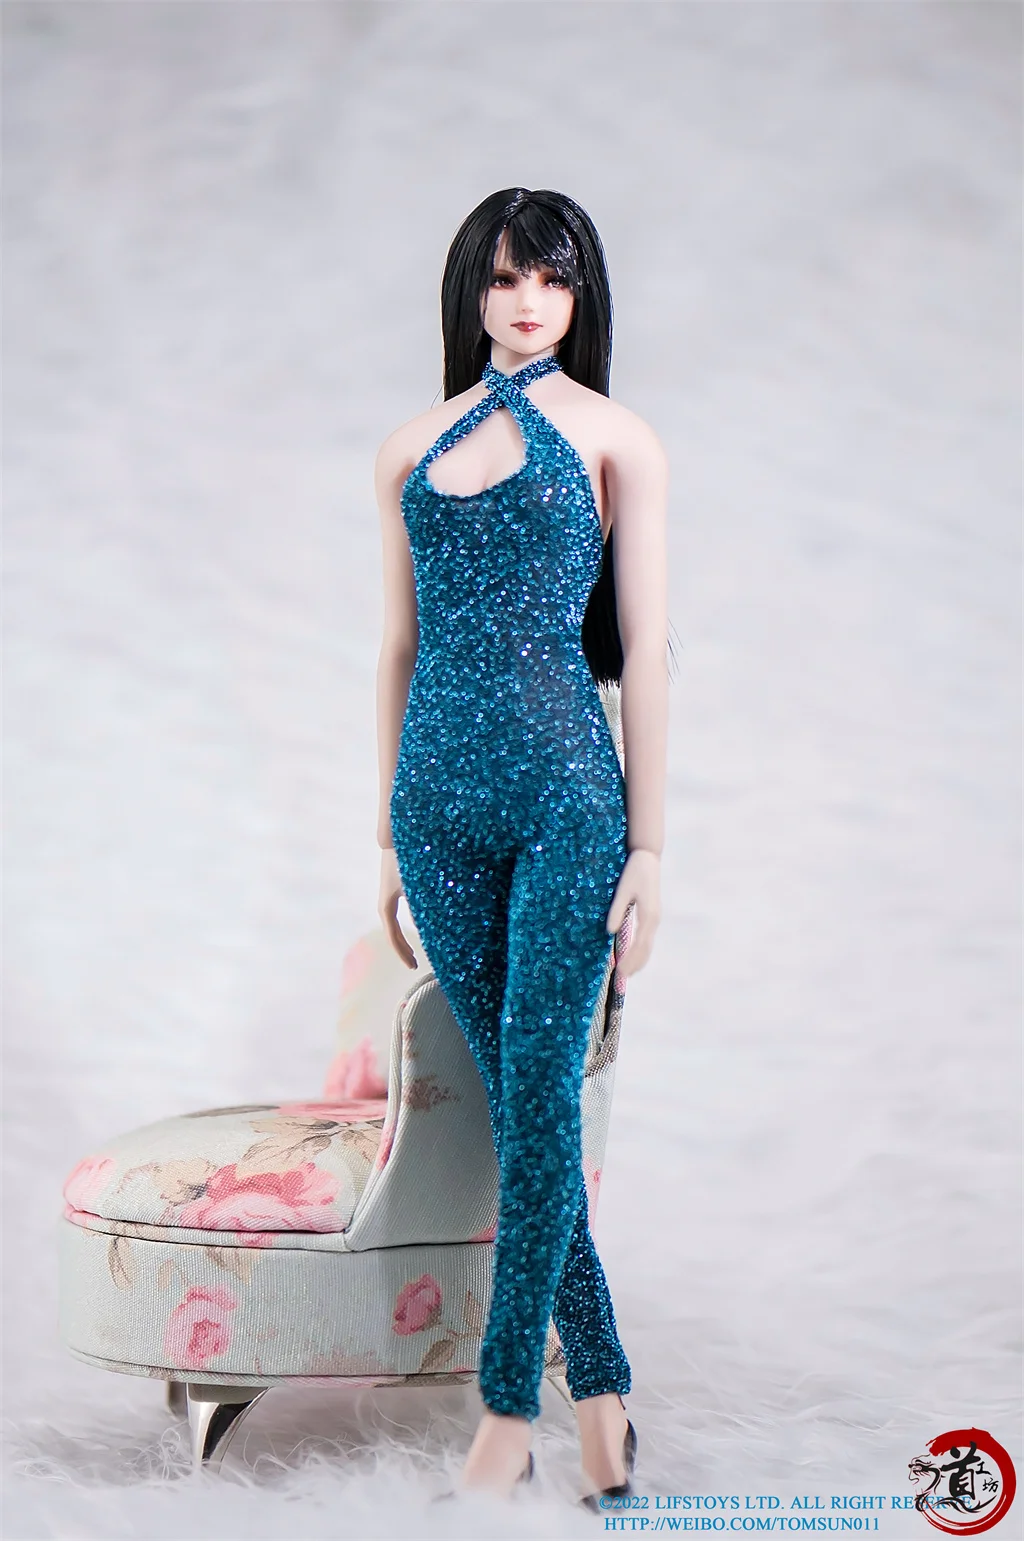 1/6 Backless Deep V Jumpsuit 2B 2A For 12" Hot Toys PHICEN TBL Female Figure USA 